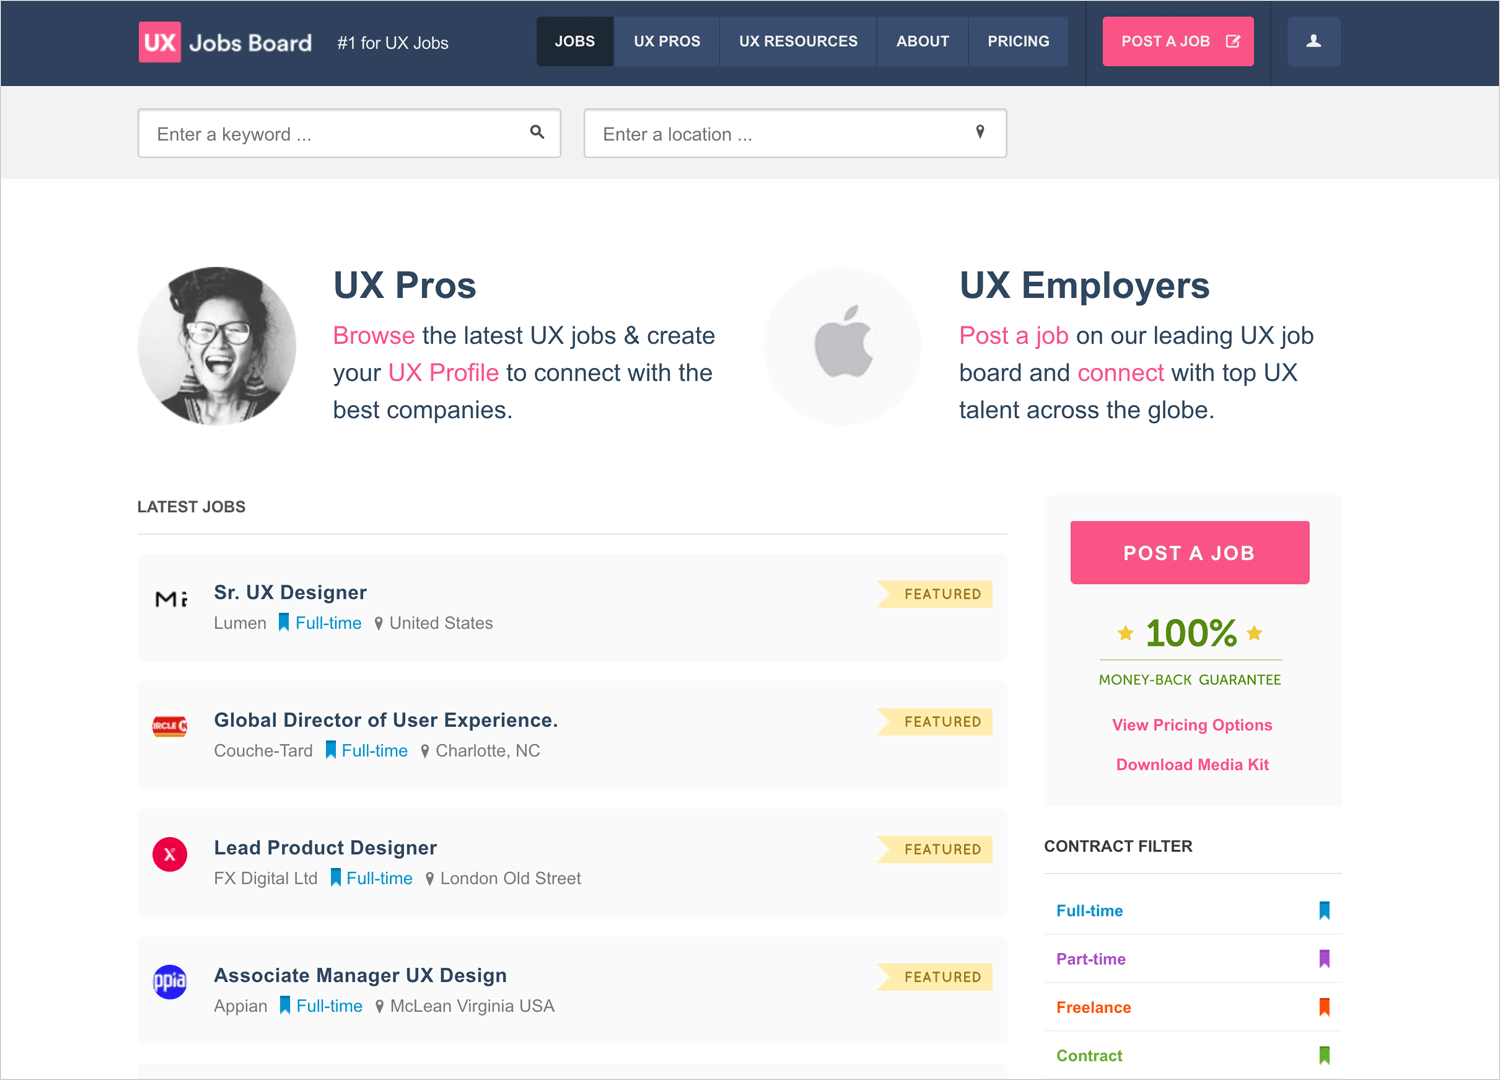 ux design jobs board as place to find design gigs